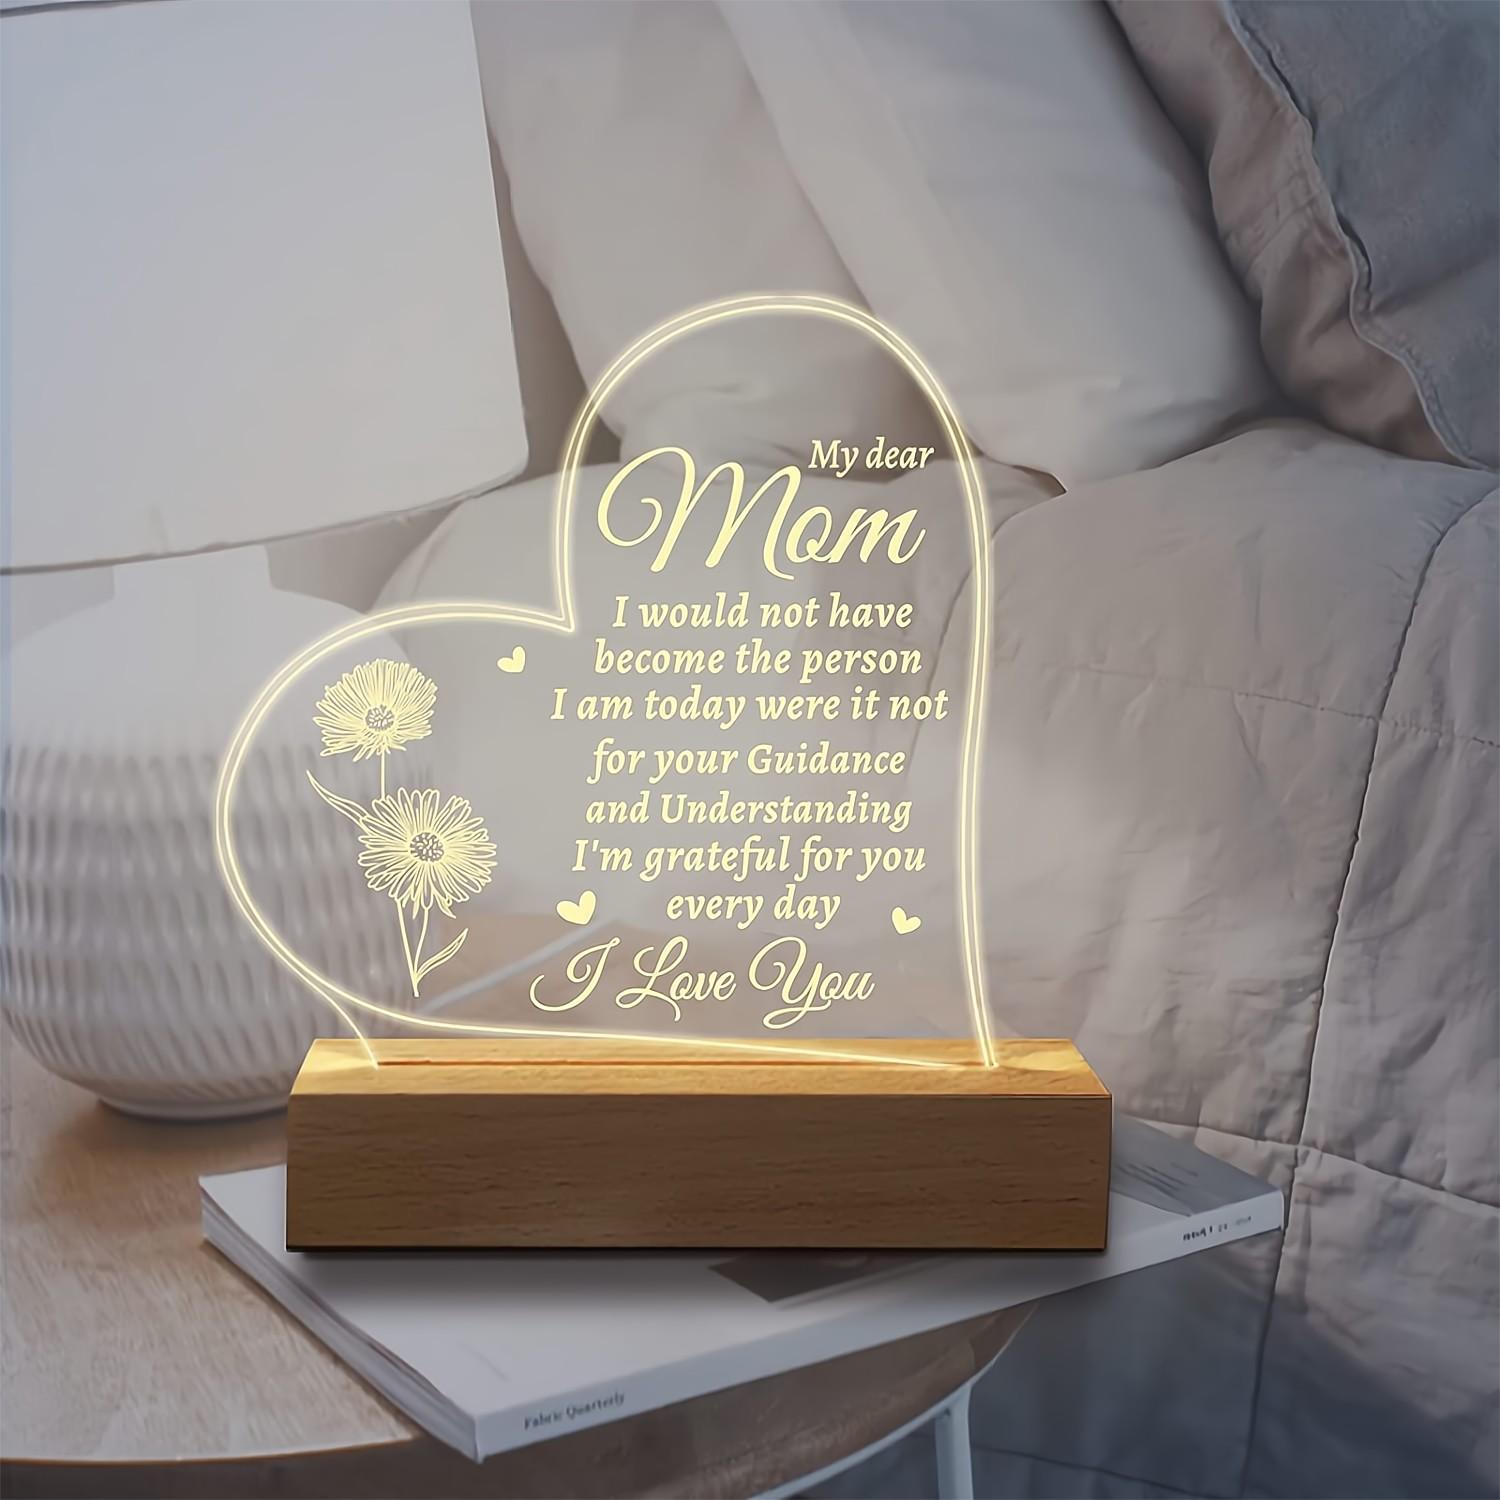 Birthday Gifts for Mom from Daughter, Son - Useful Mother Day Gifts, M